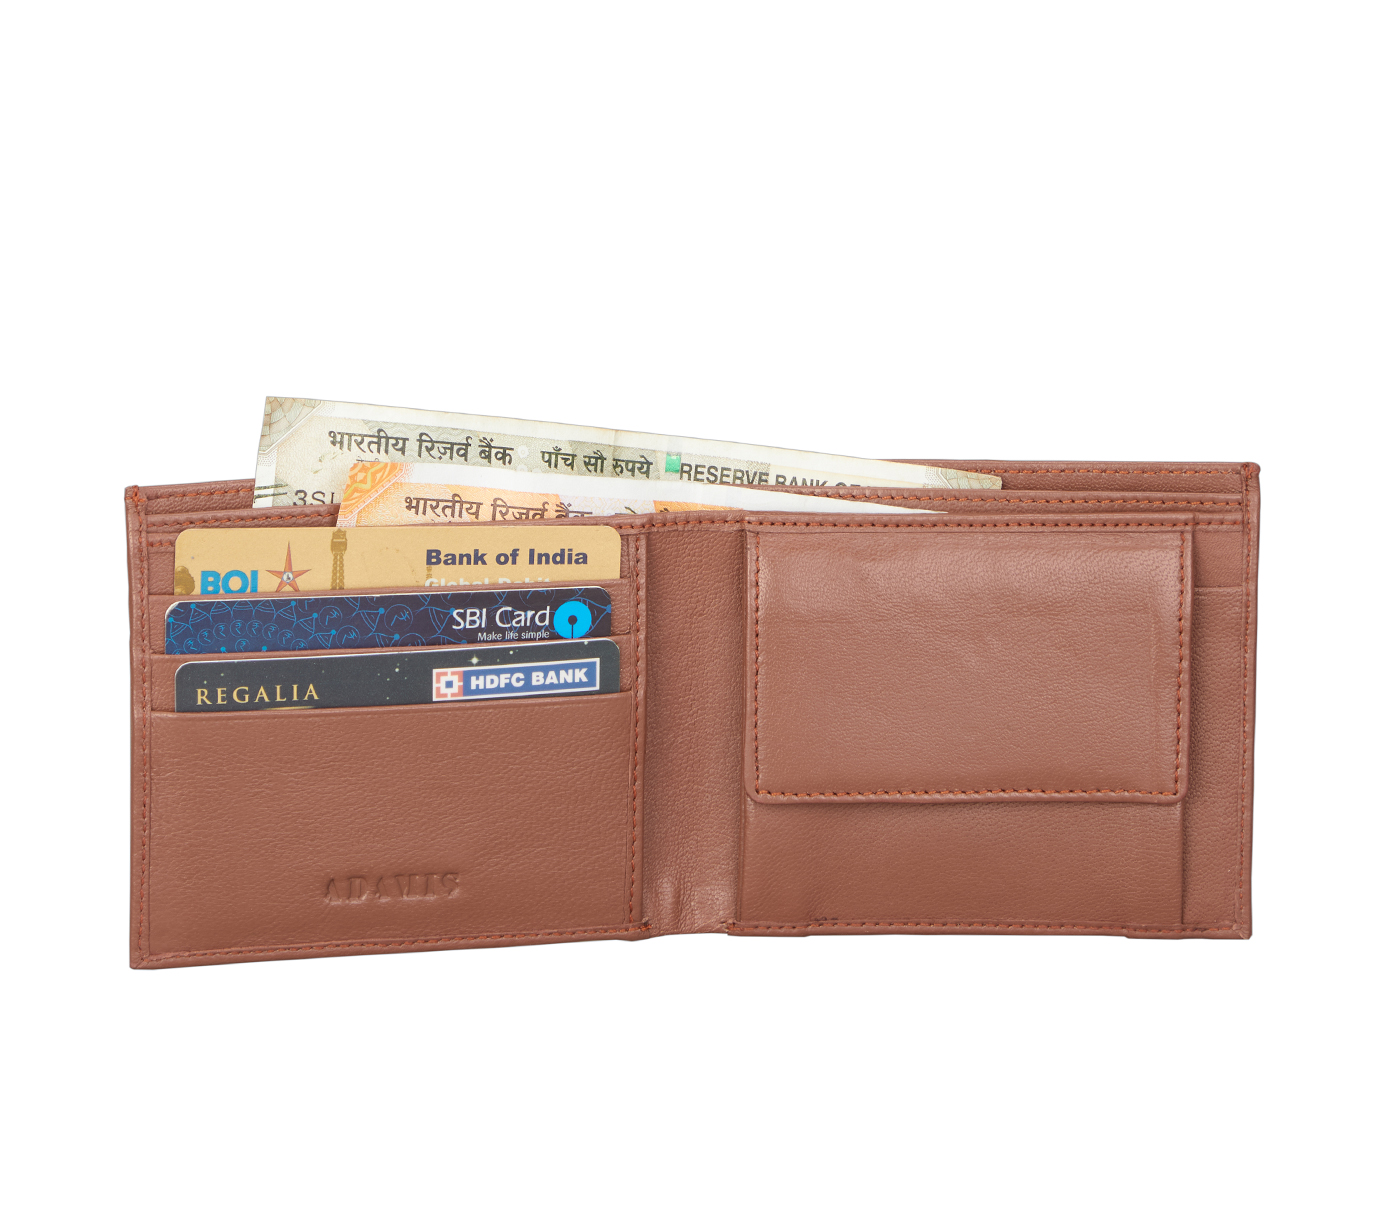 W40-Angelo-Men's bifold wallet with coin pocket in Genuine Leather - Tan